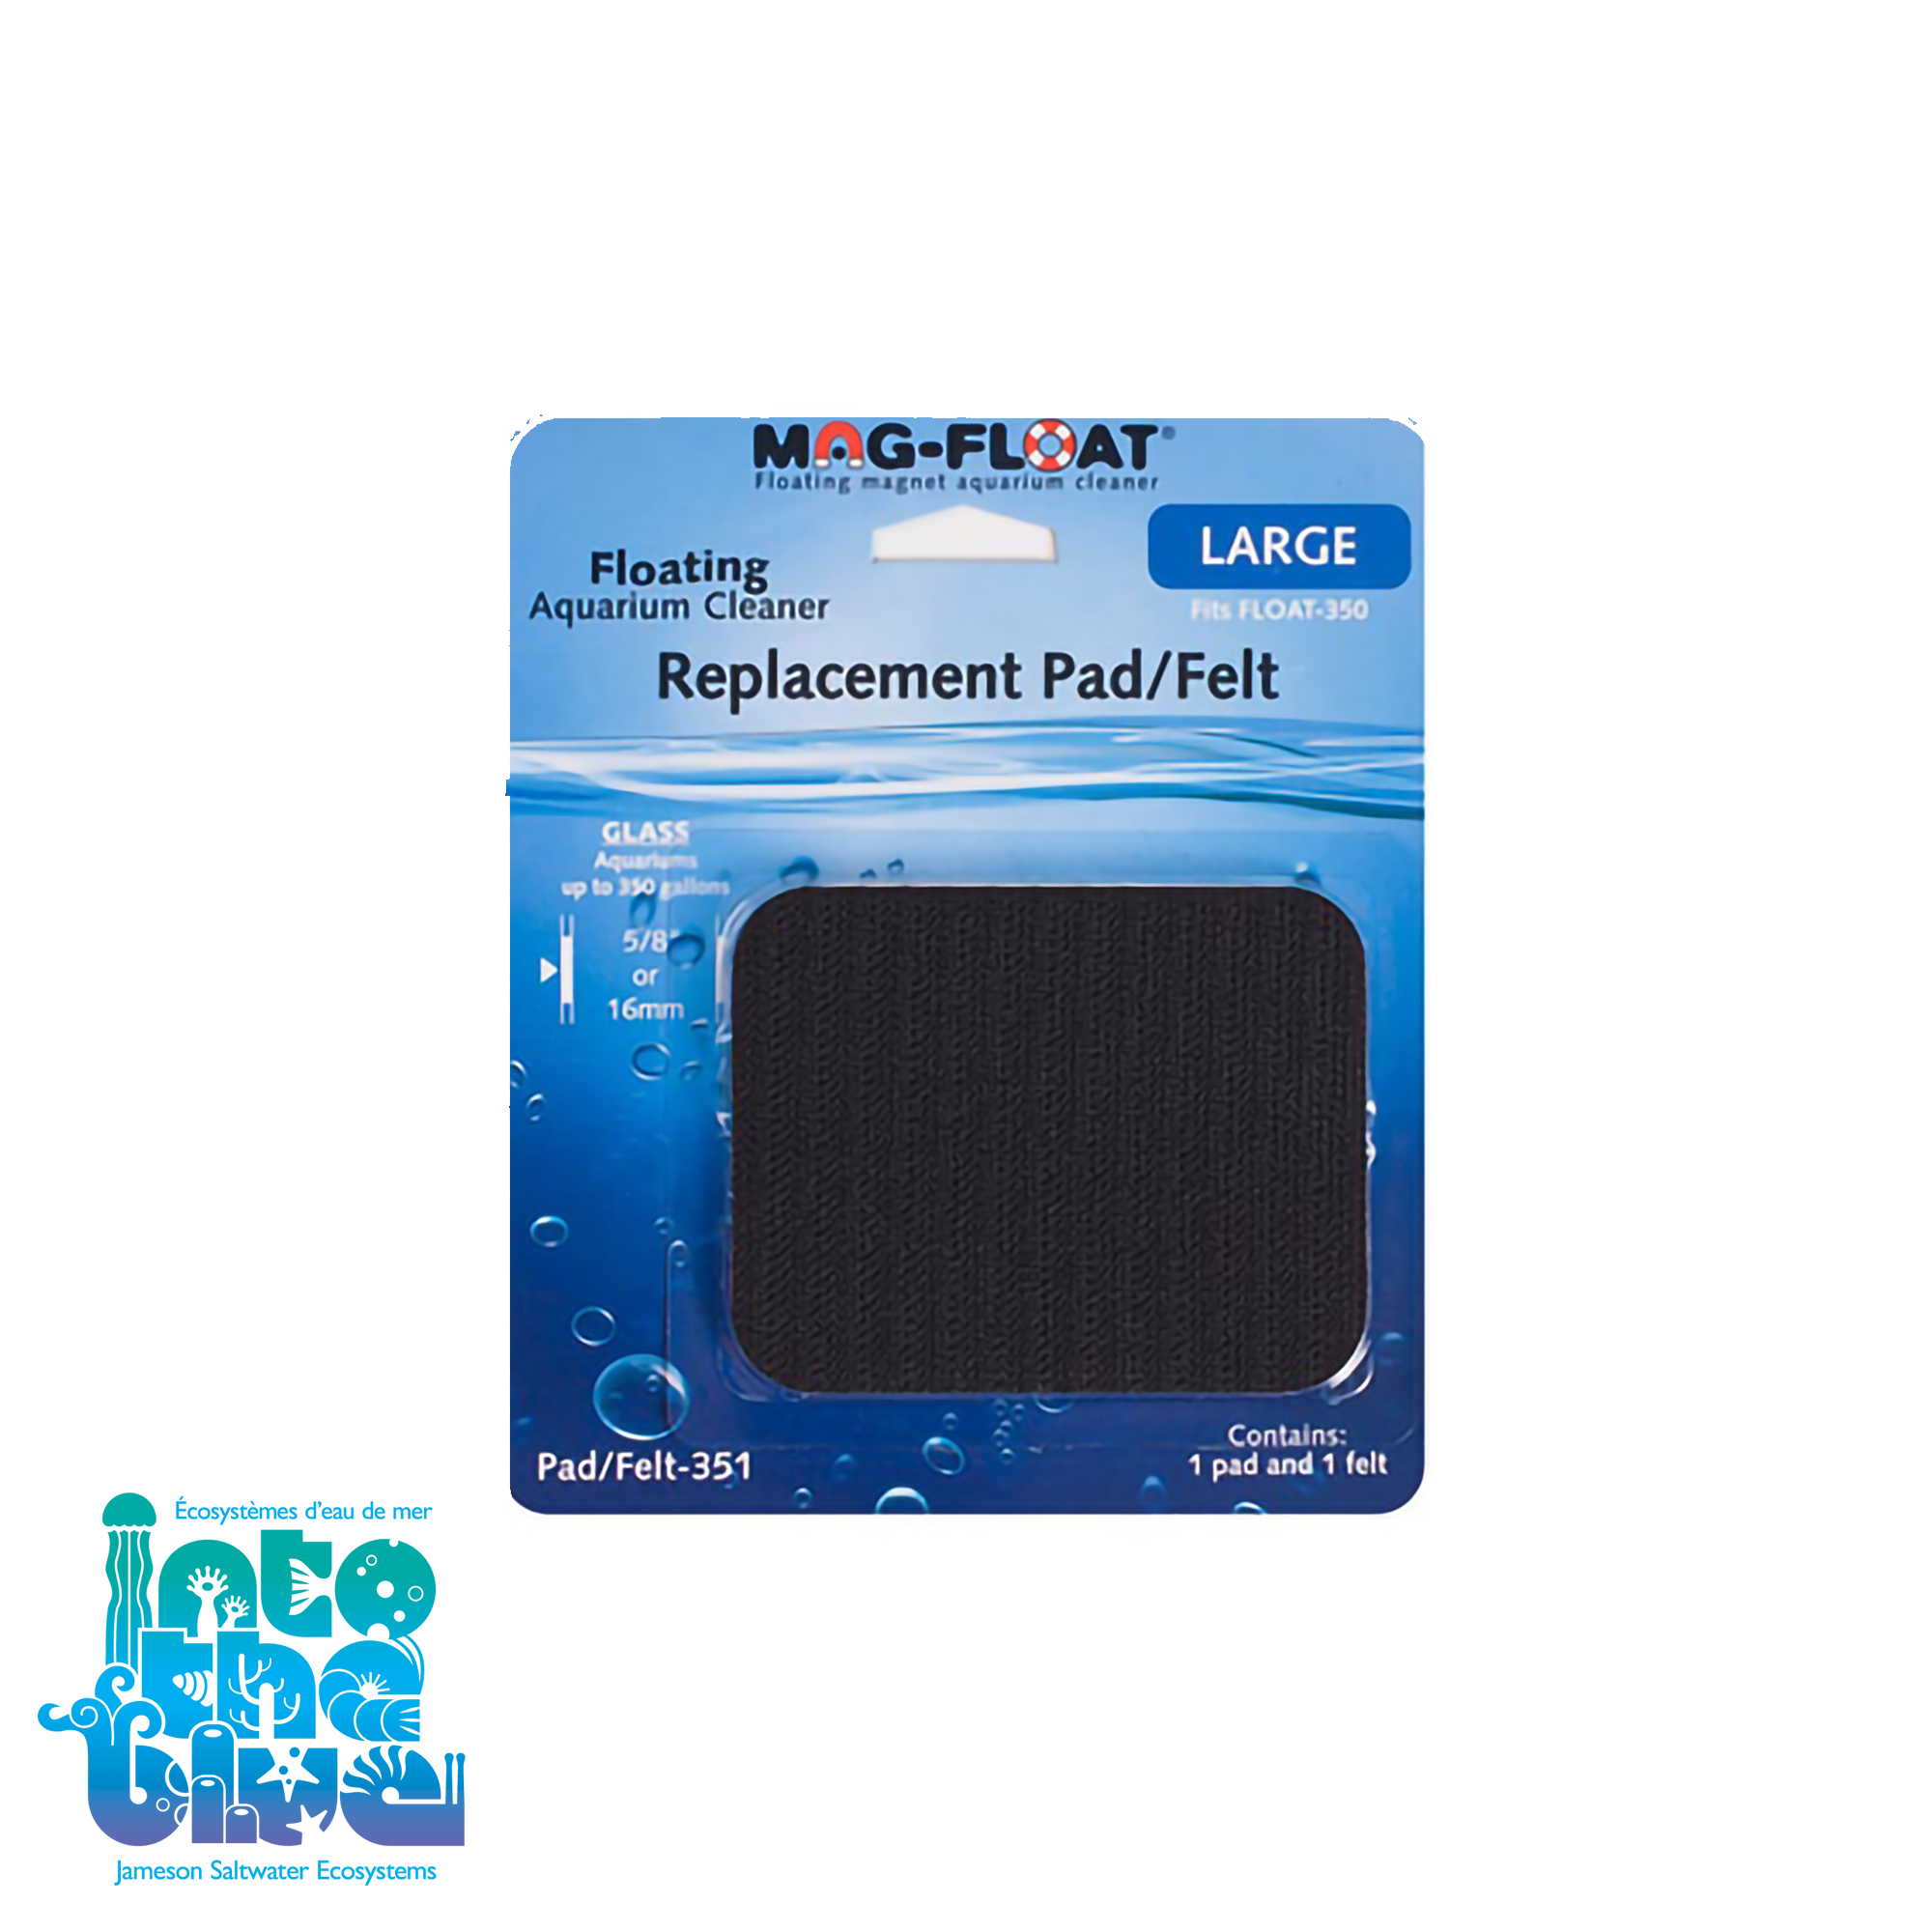 Mag-Floats - Floating Magnet Aquarium Cleaner | Replacement Pads